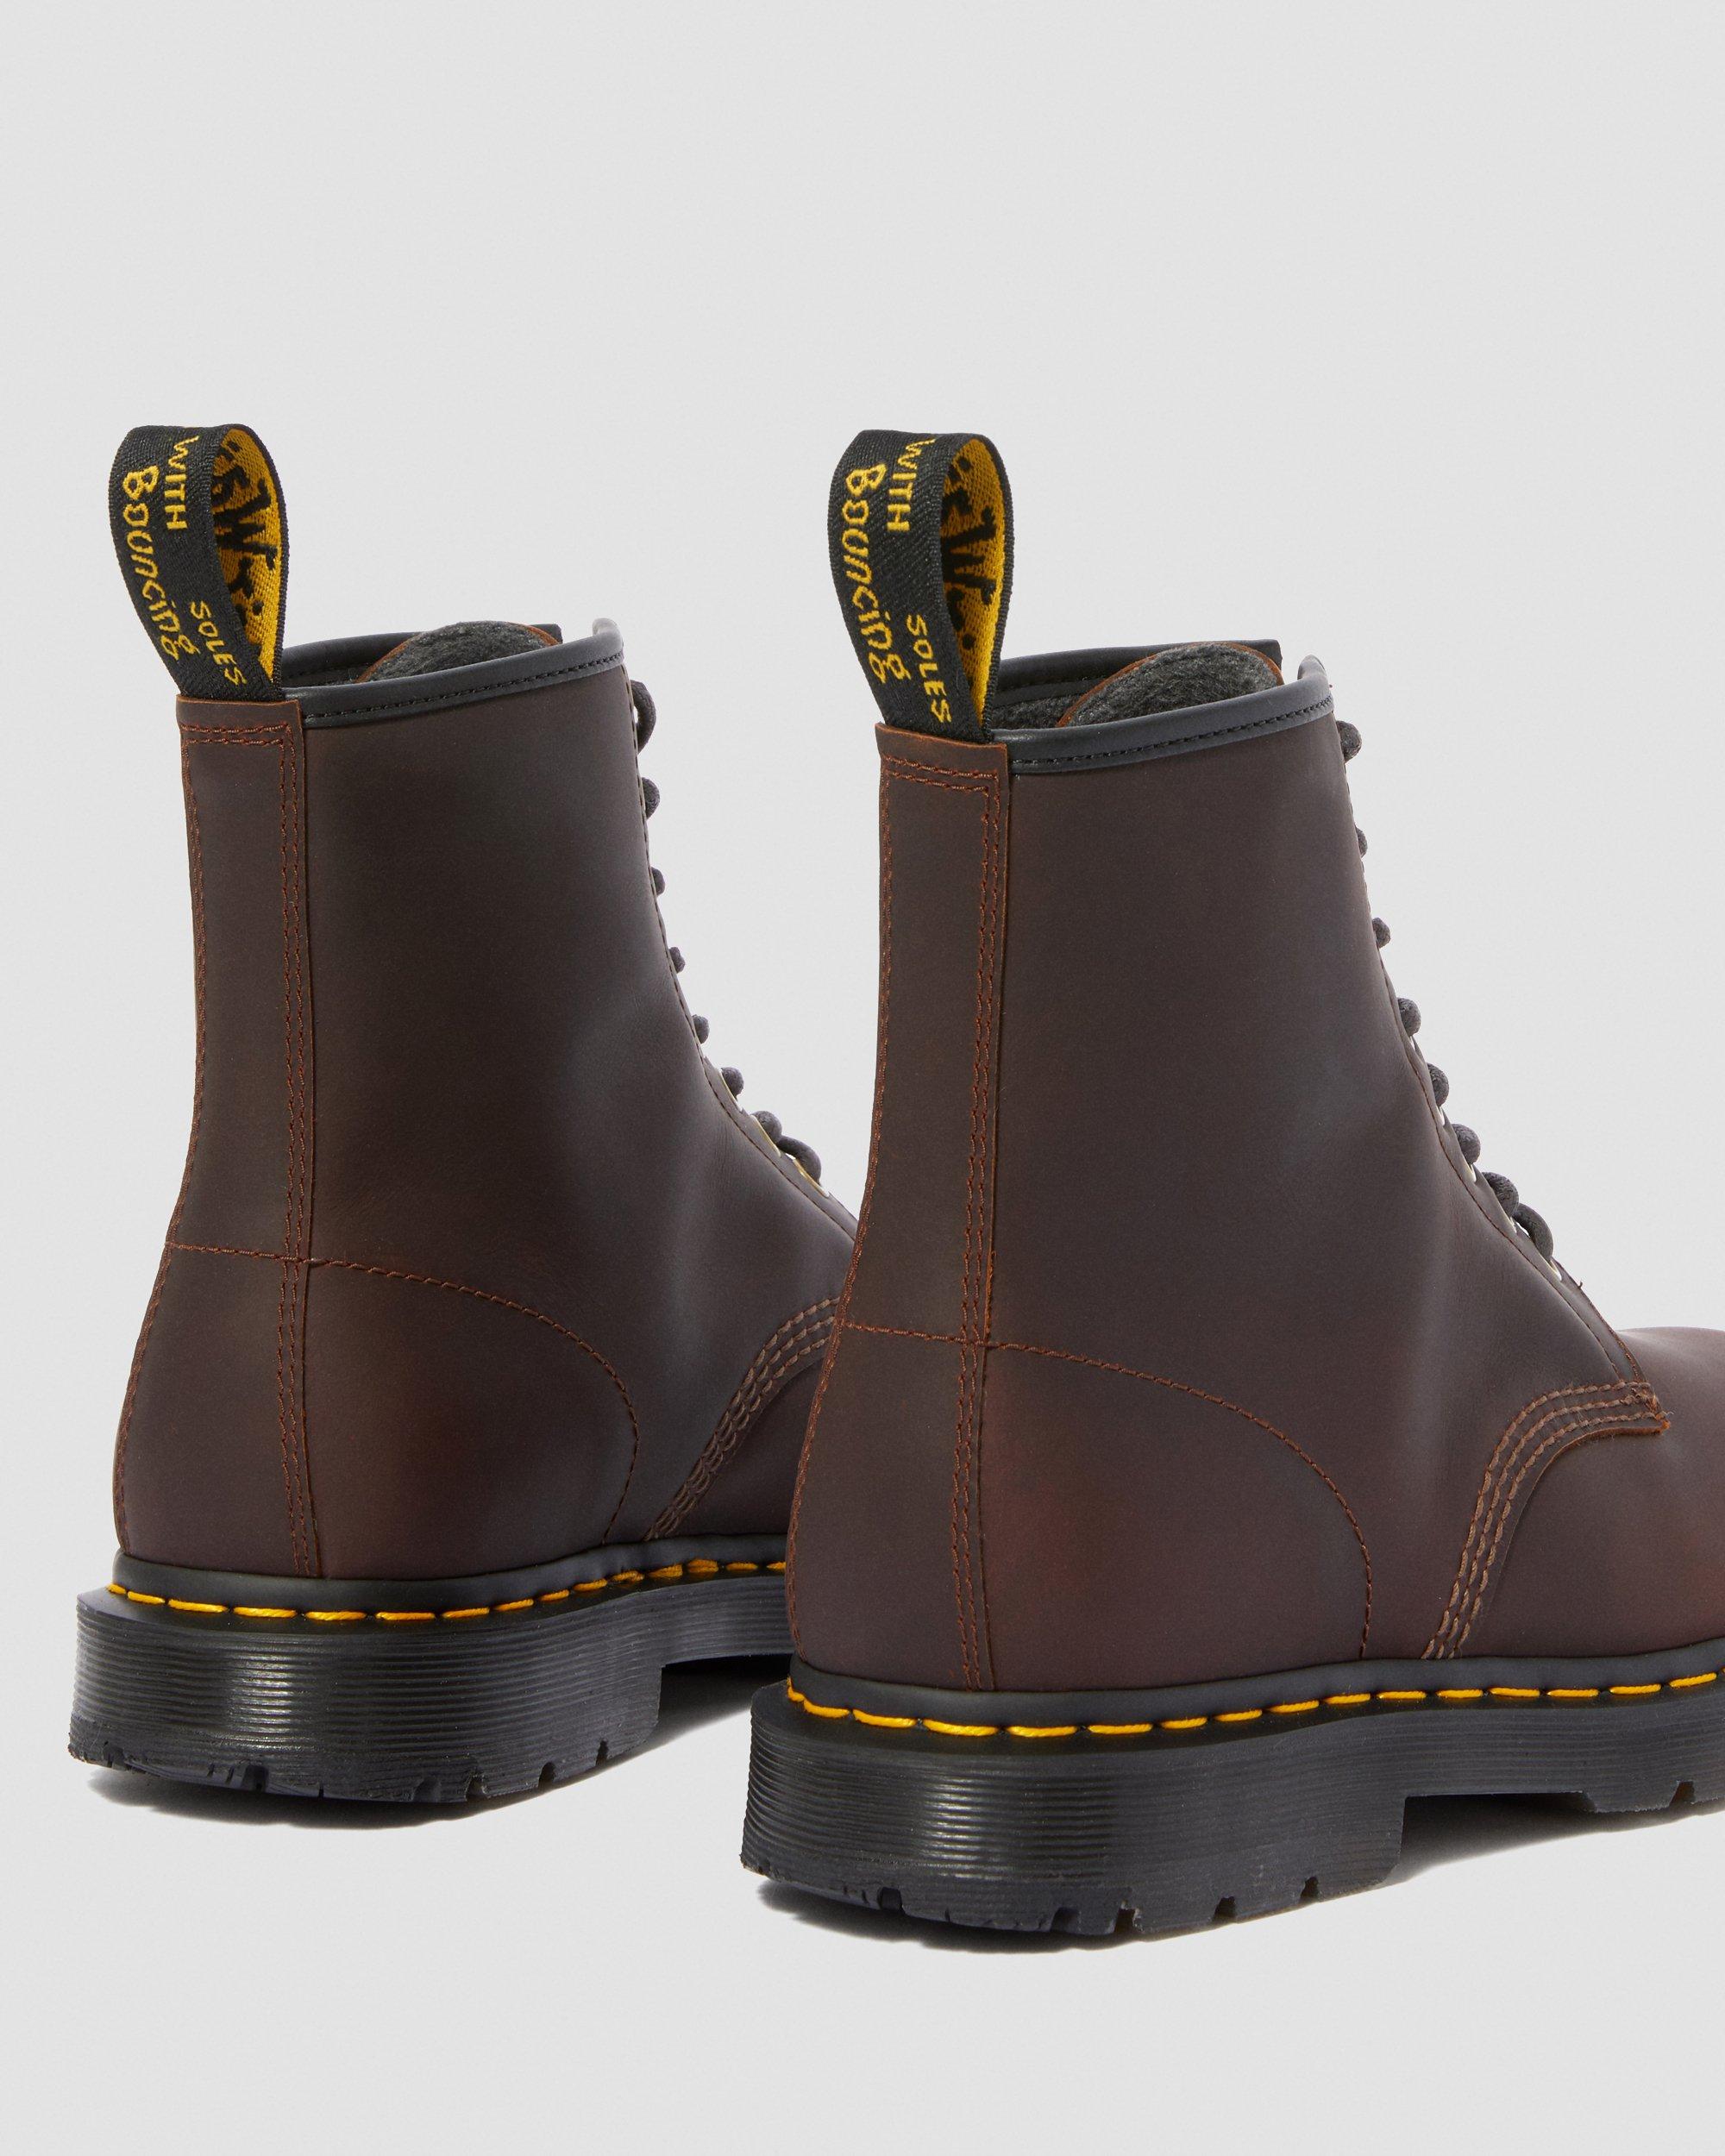 WINTERGRIP LACE UP BOOTS | Dr. Martens 